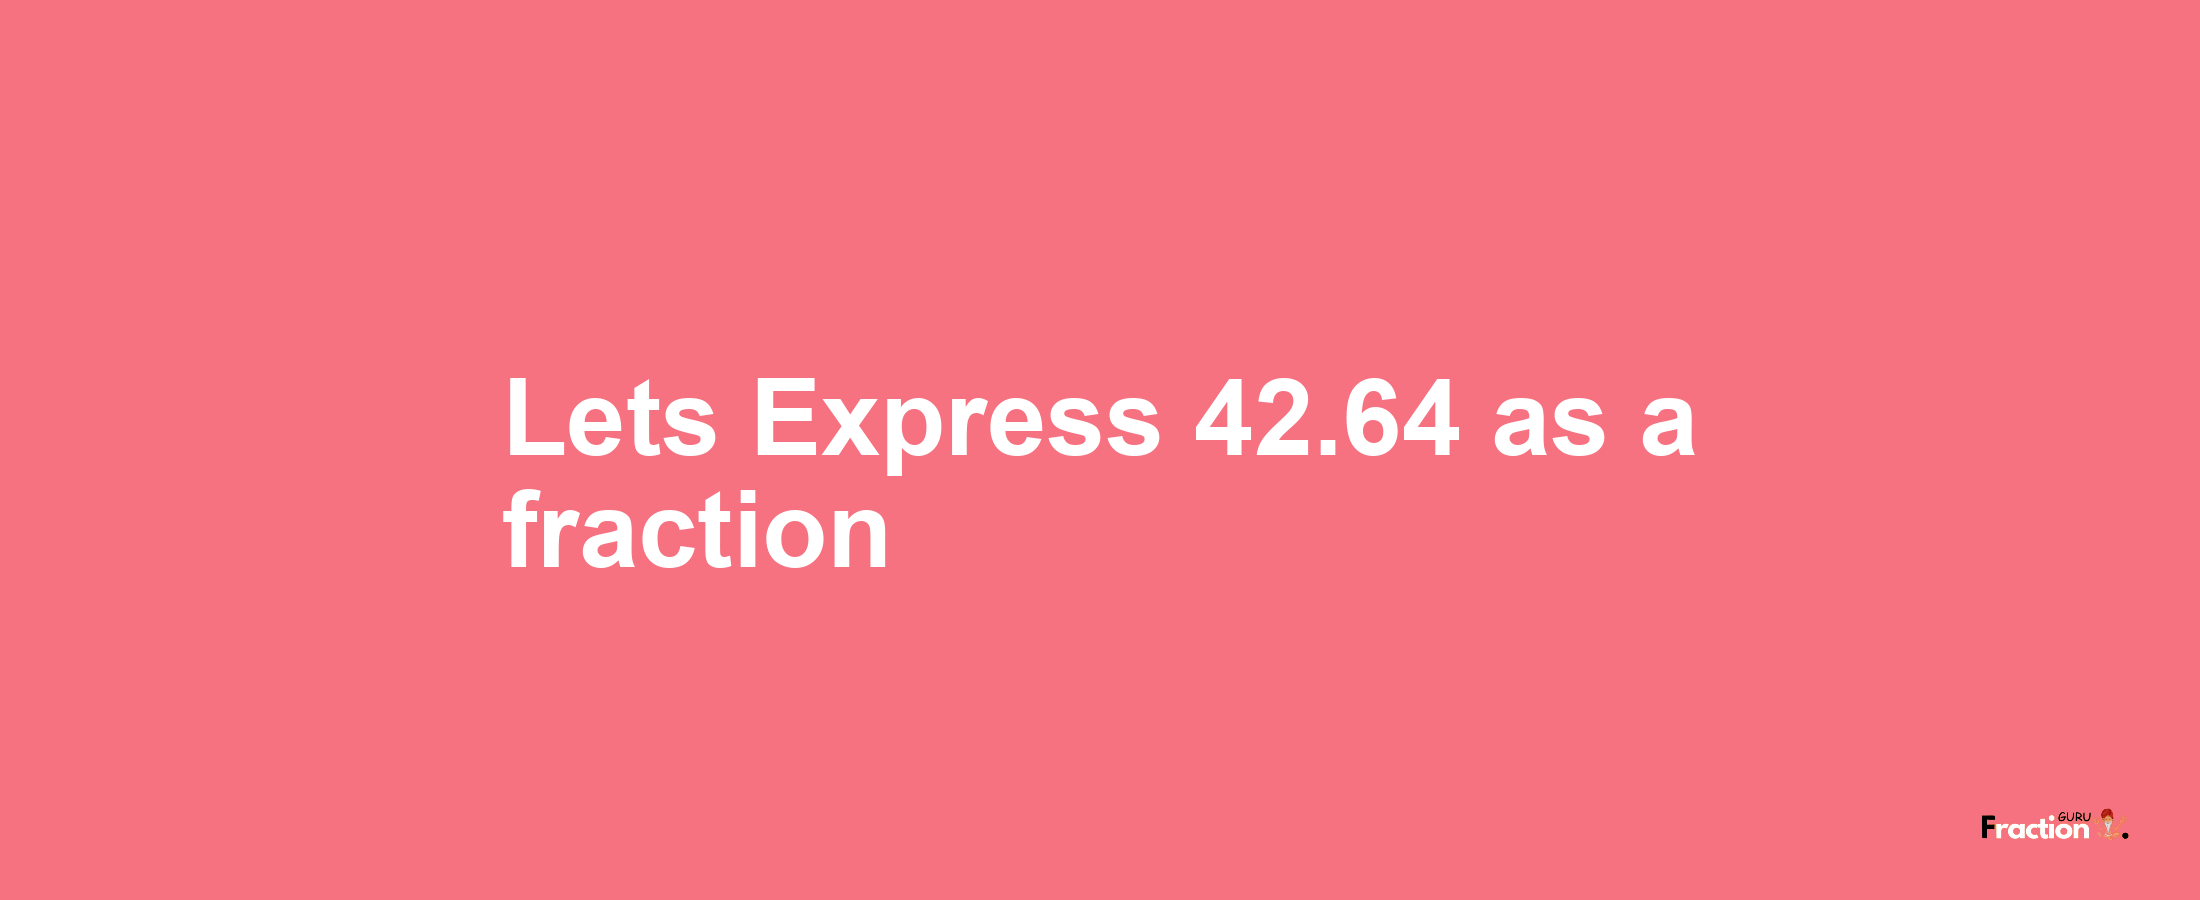 Lets Express 42.64 as afraction